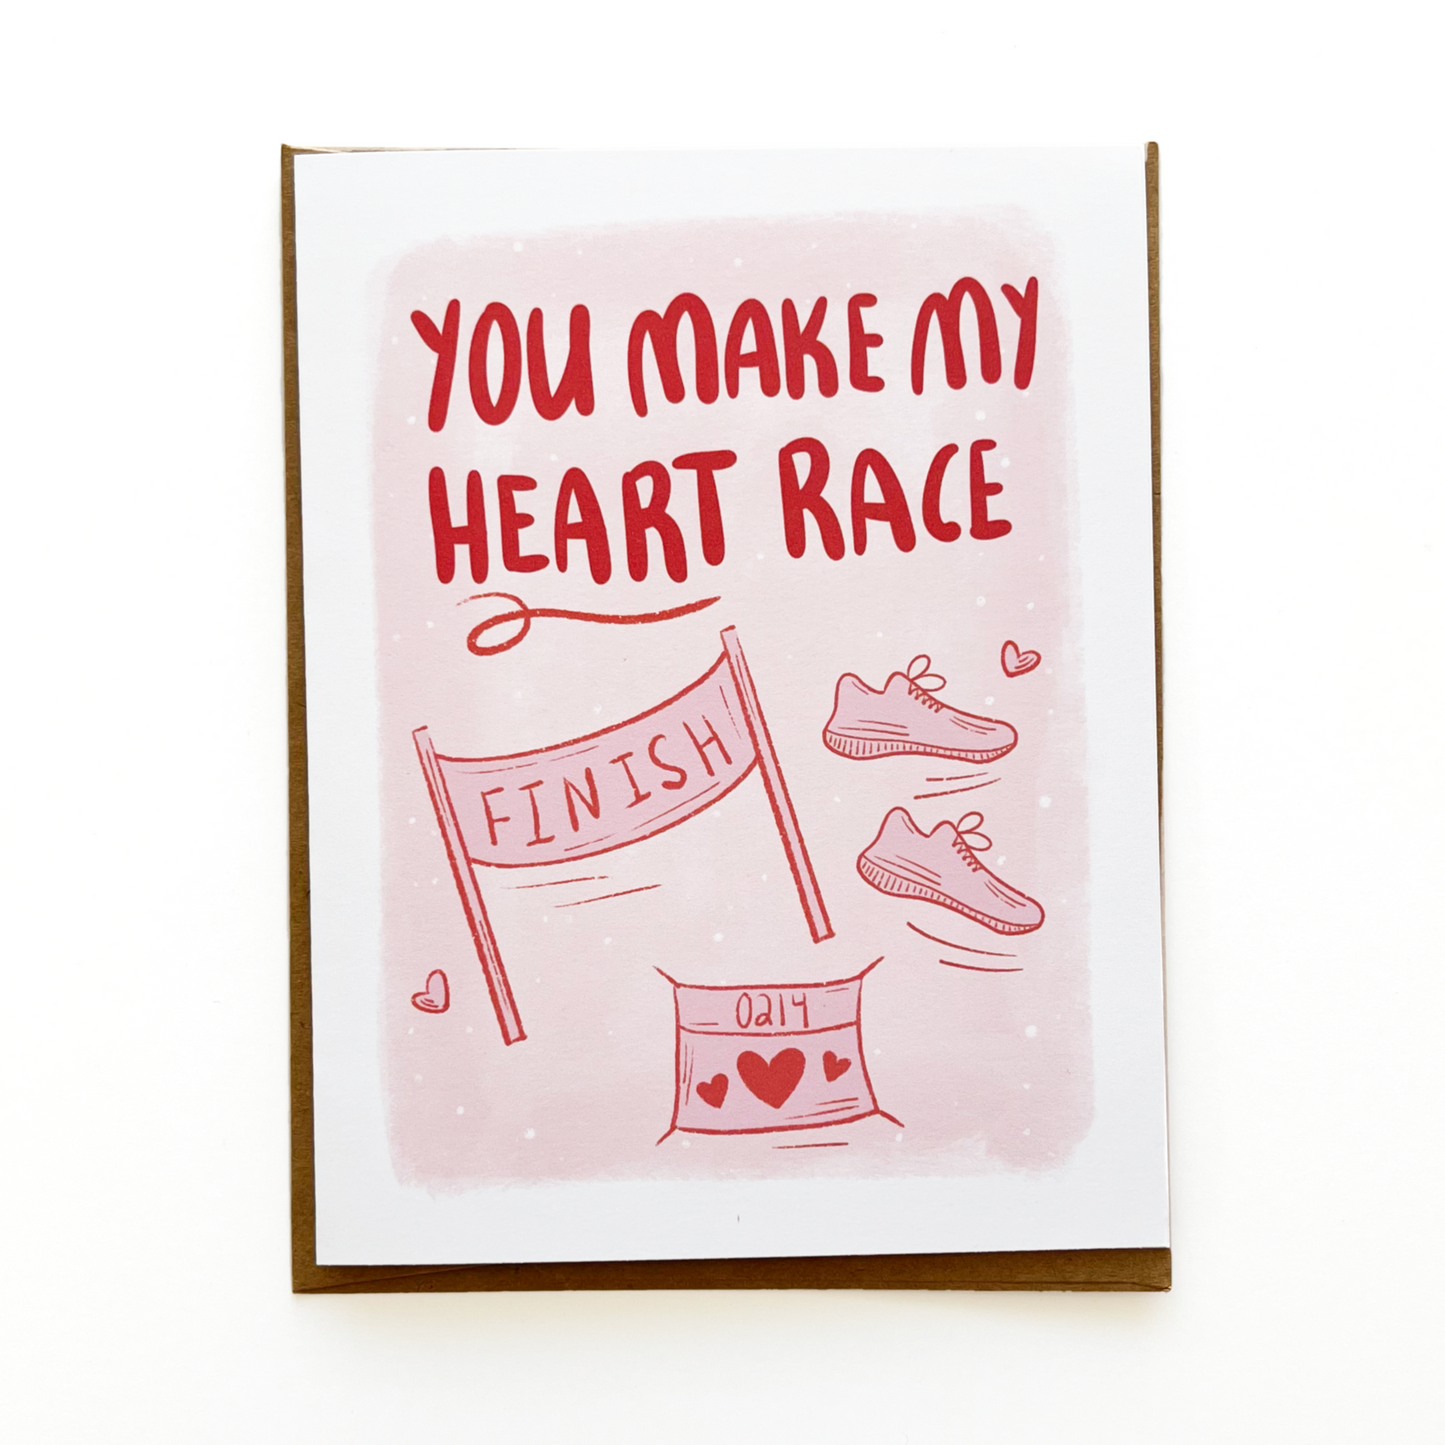 You make my heart race greeting card in pink and red